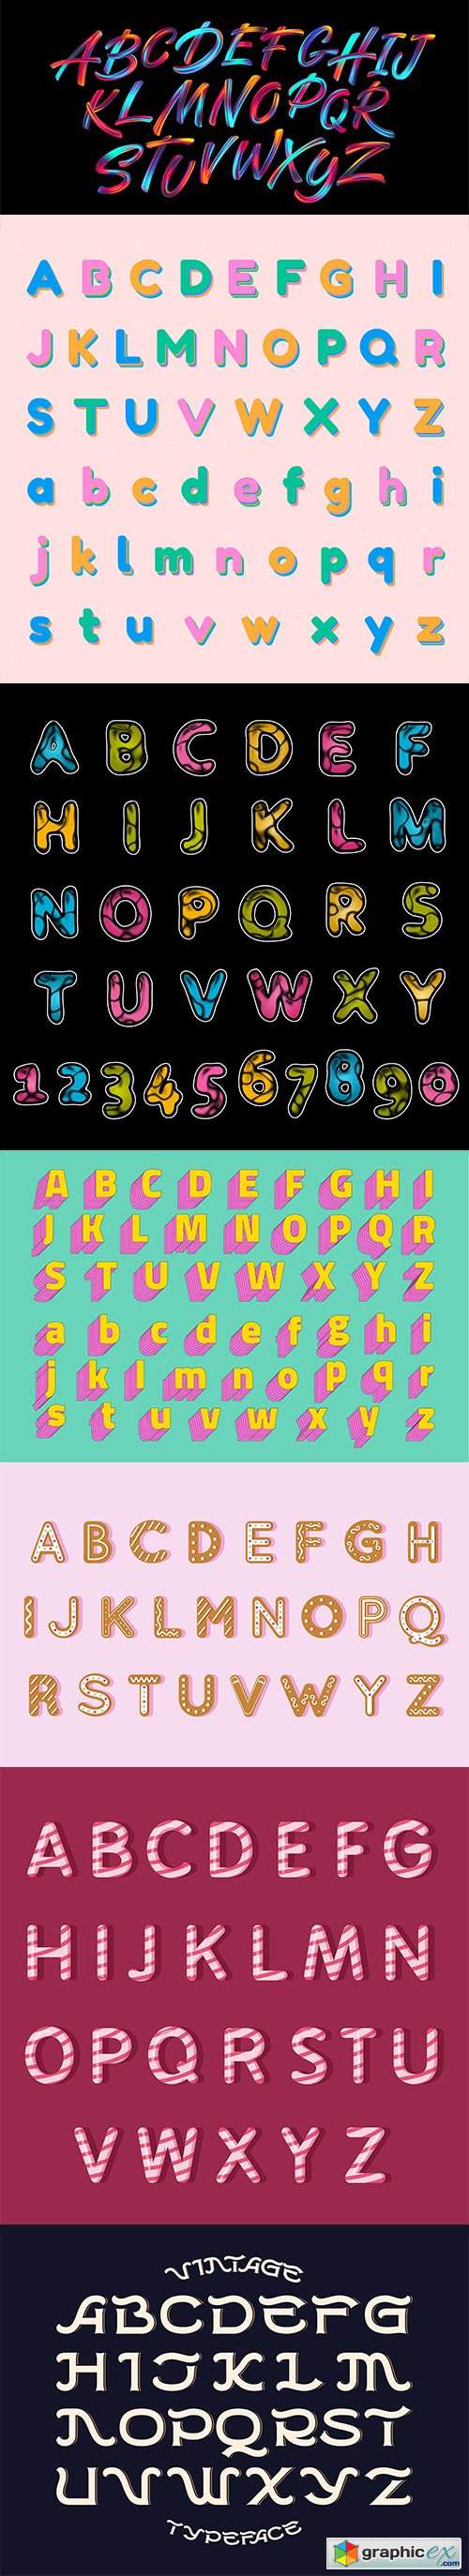  Alphabet collection of vector fonts 